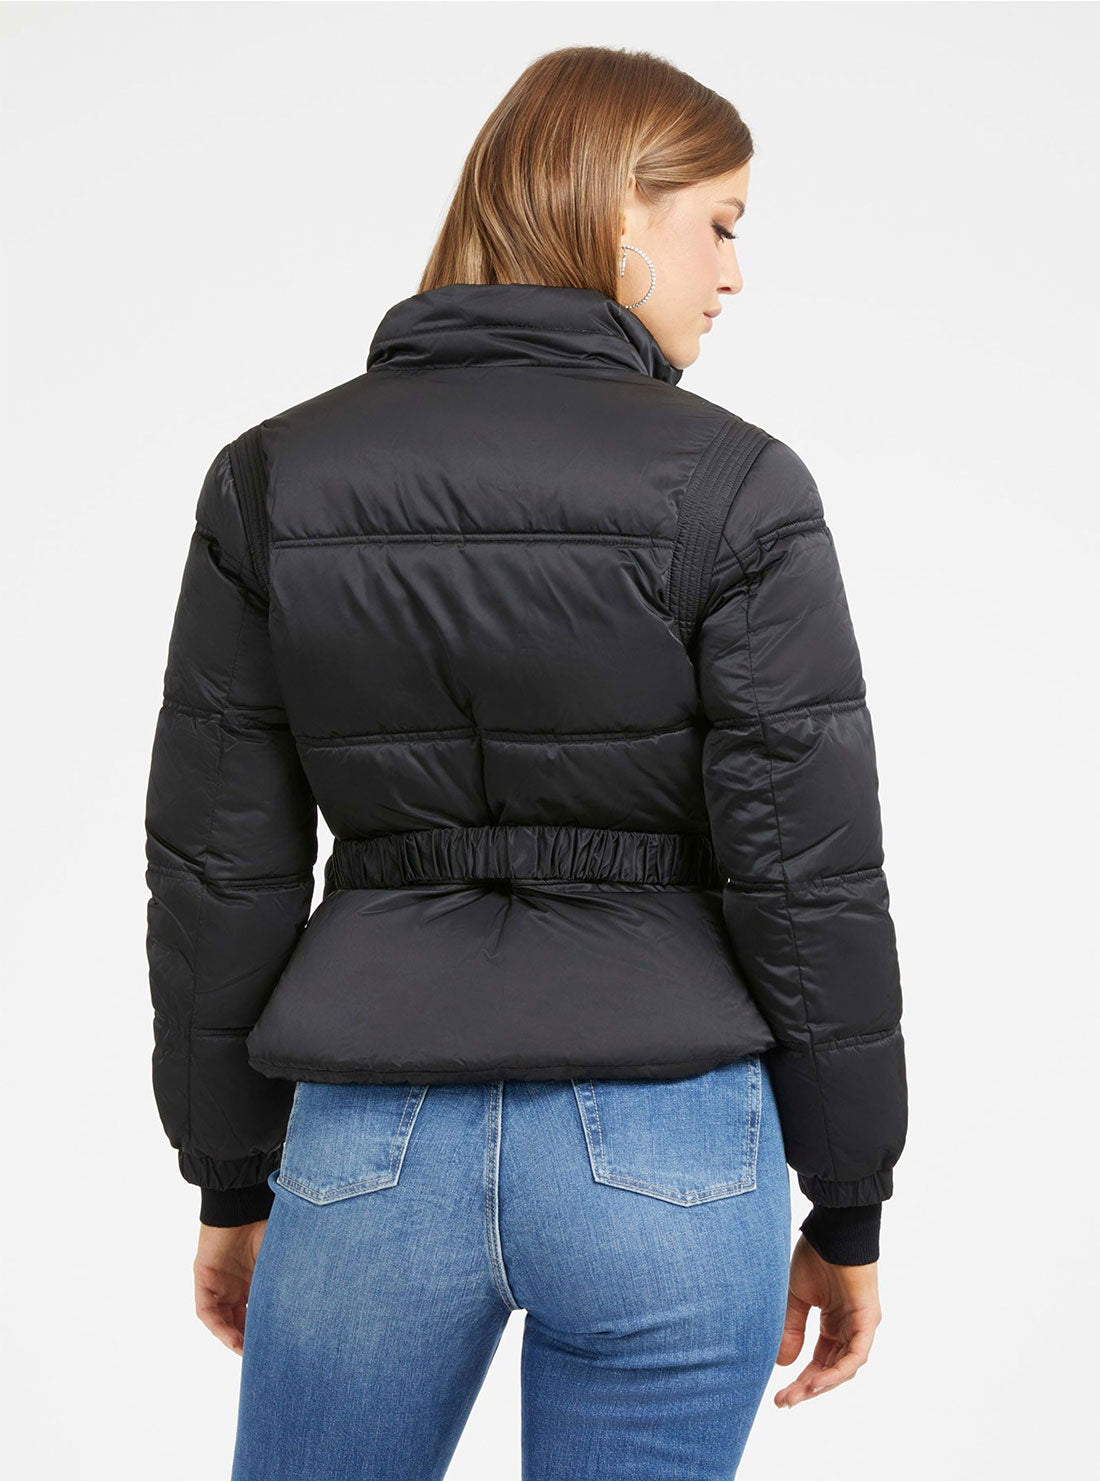 GUESS Eco Black Lucia Bum Bag Puffer Jacket back view